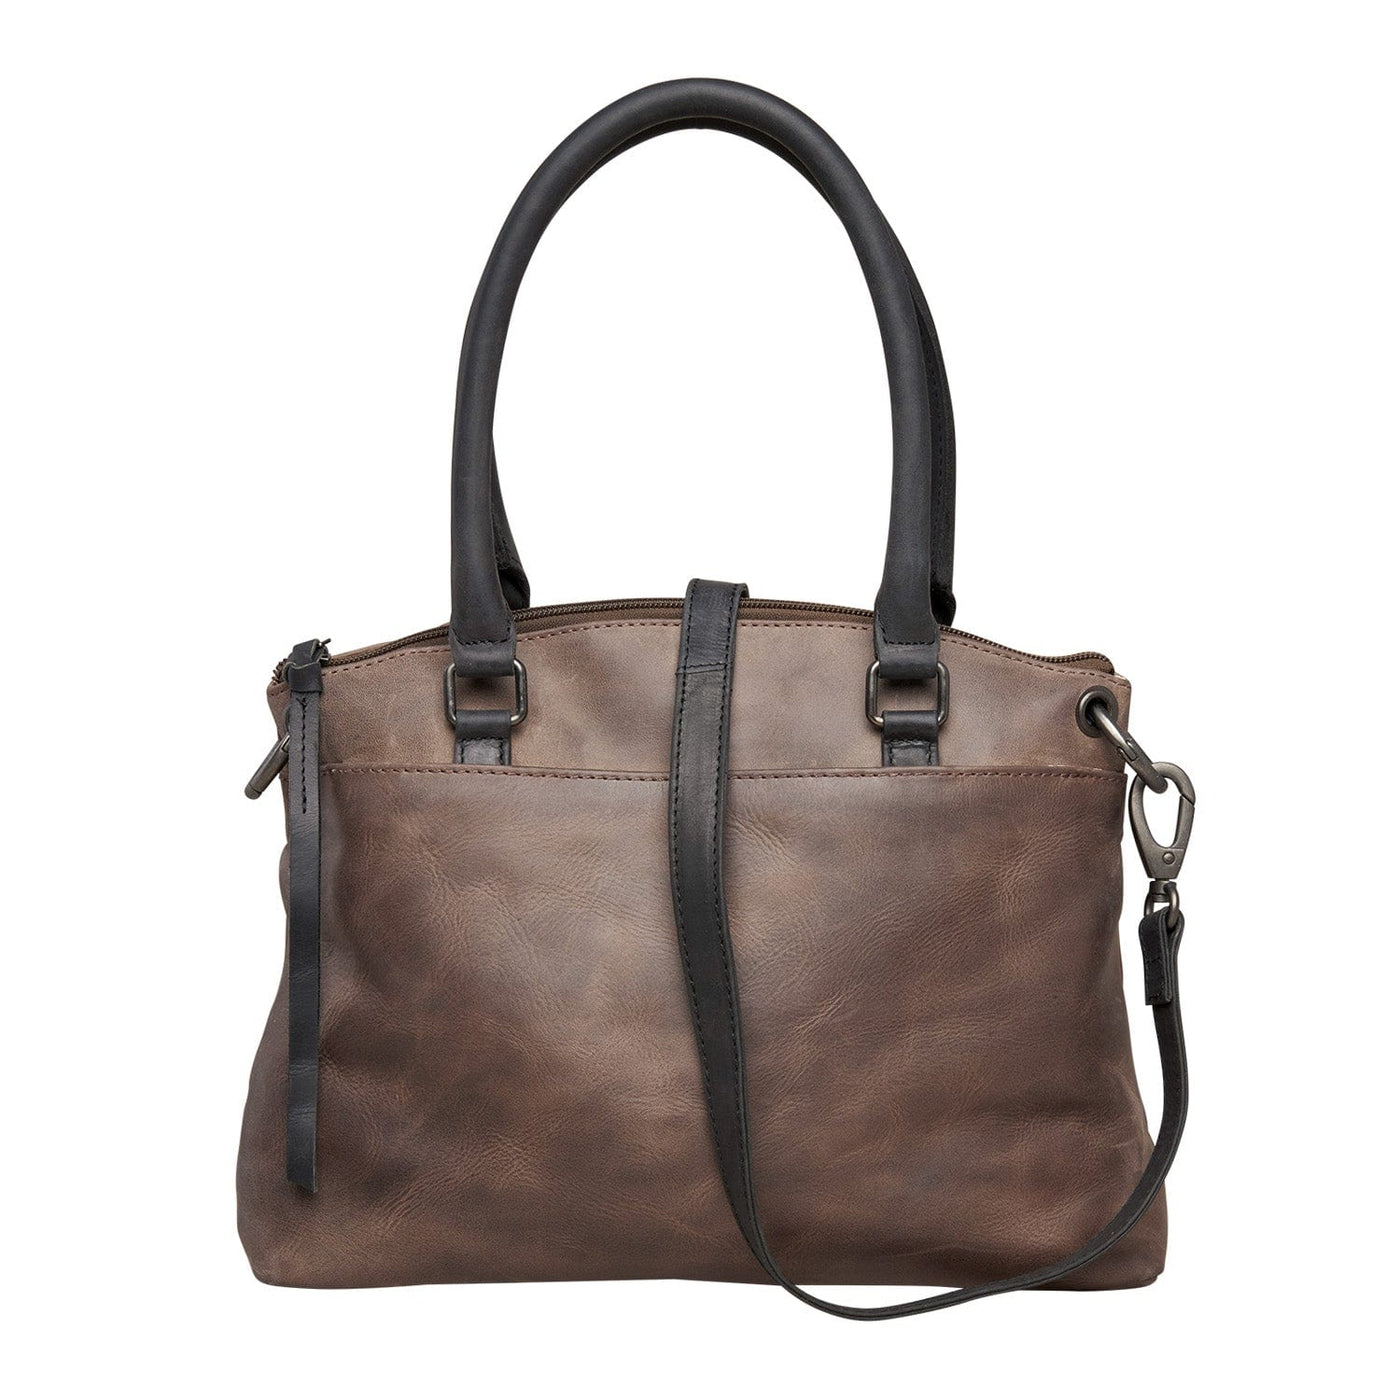 Concealed Carry Whitely Leather Satchel